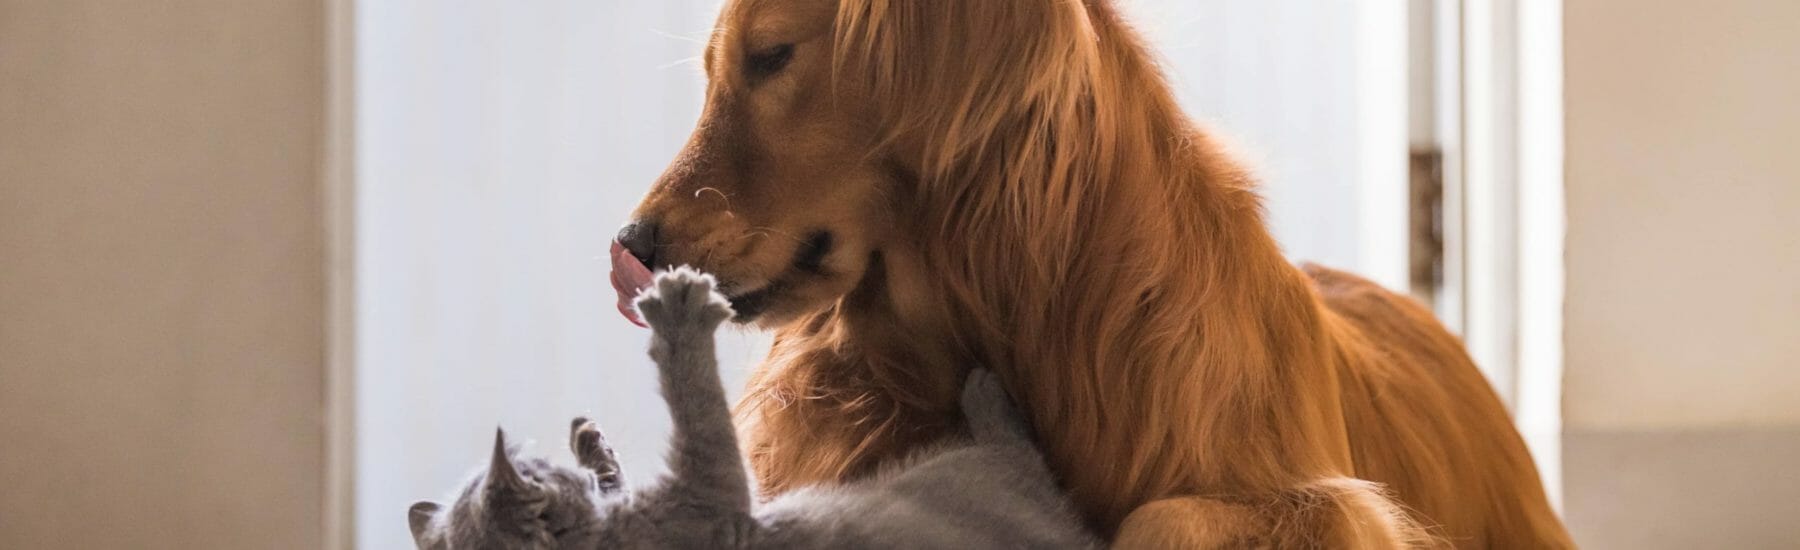 Golden dog playing with grey cat